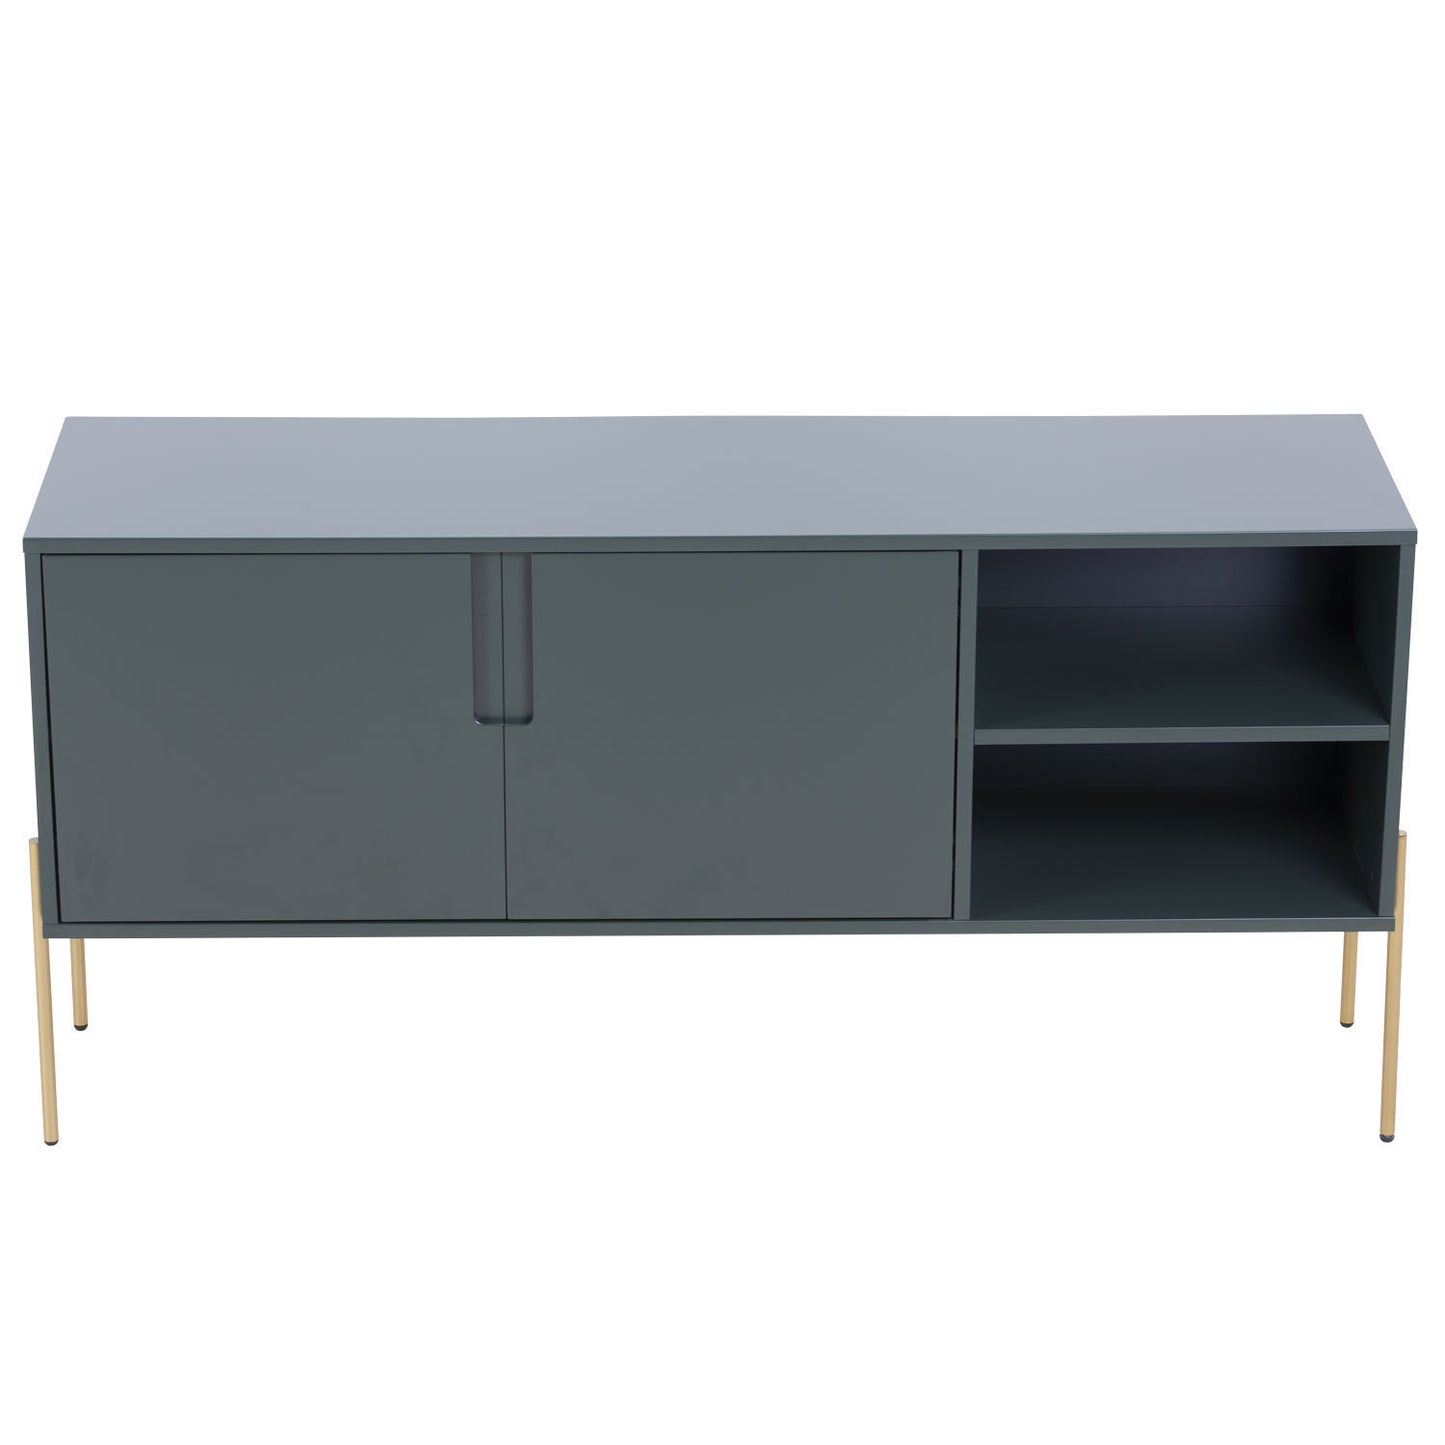 COMBO mid century Sideboard Buffet Table or TV Stand with storage for living room Kitchen